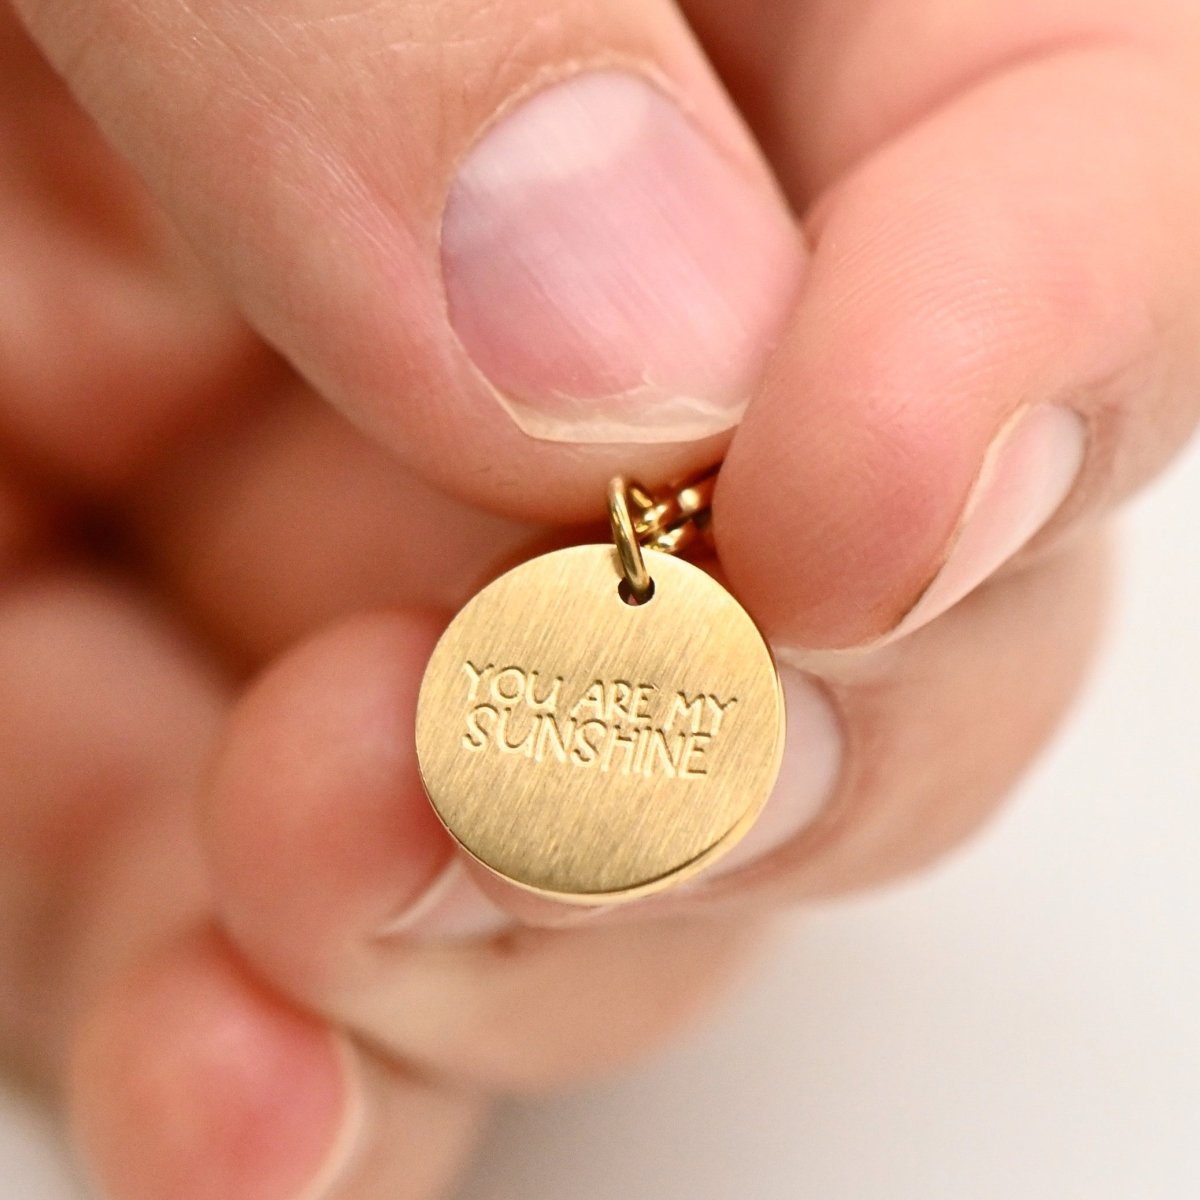 ‘You Are My Sunshine’ Engraved Charm - Camp Hollow